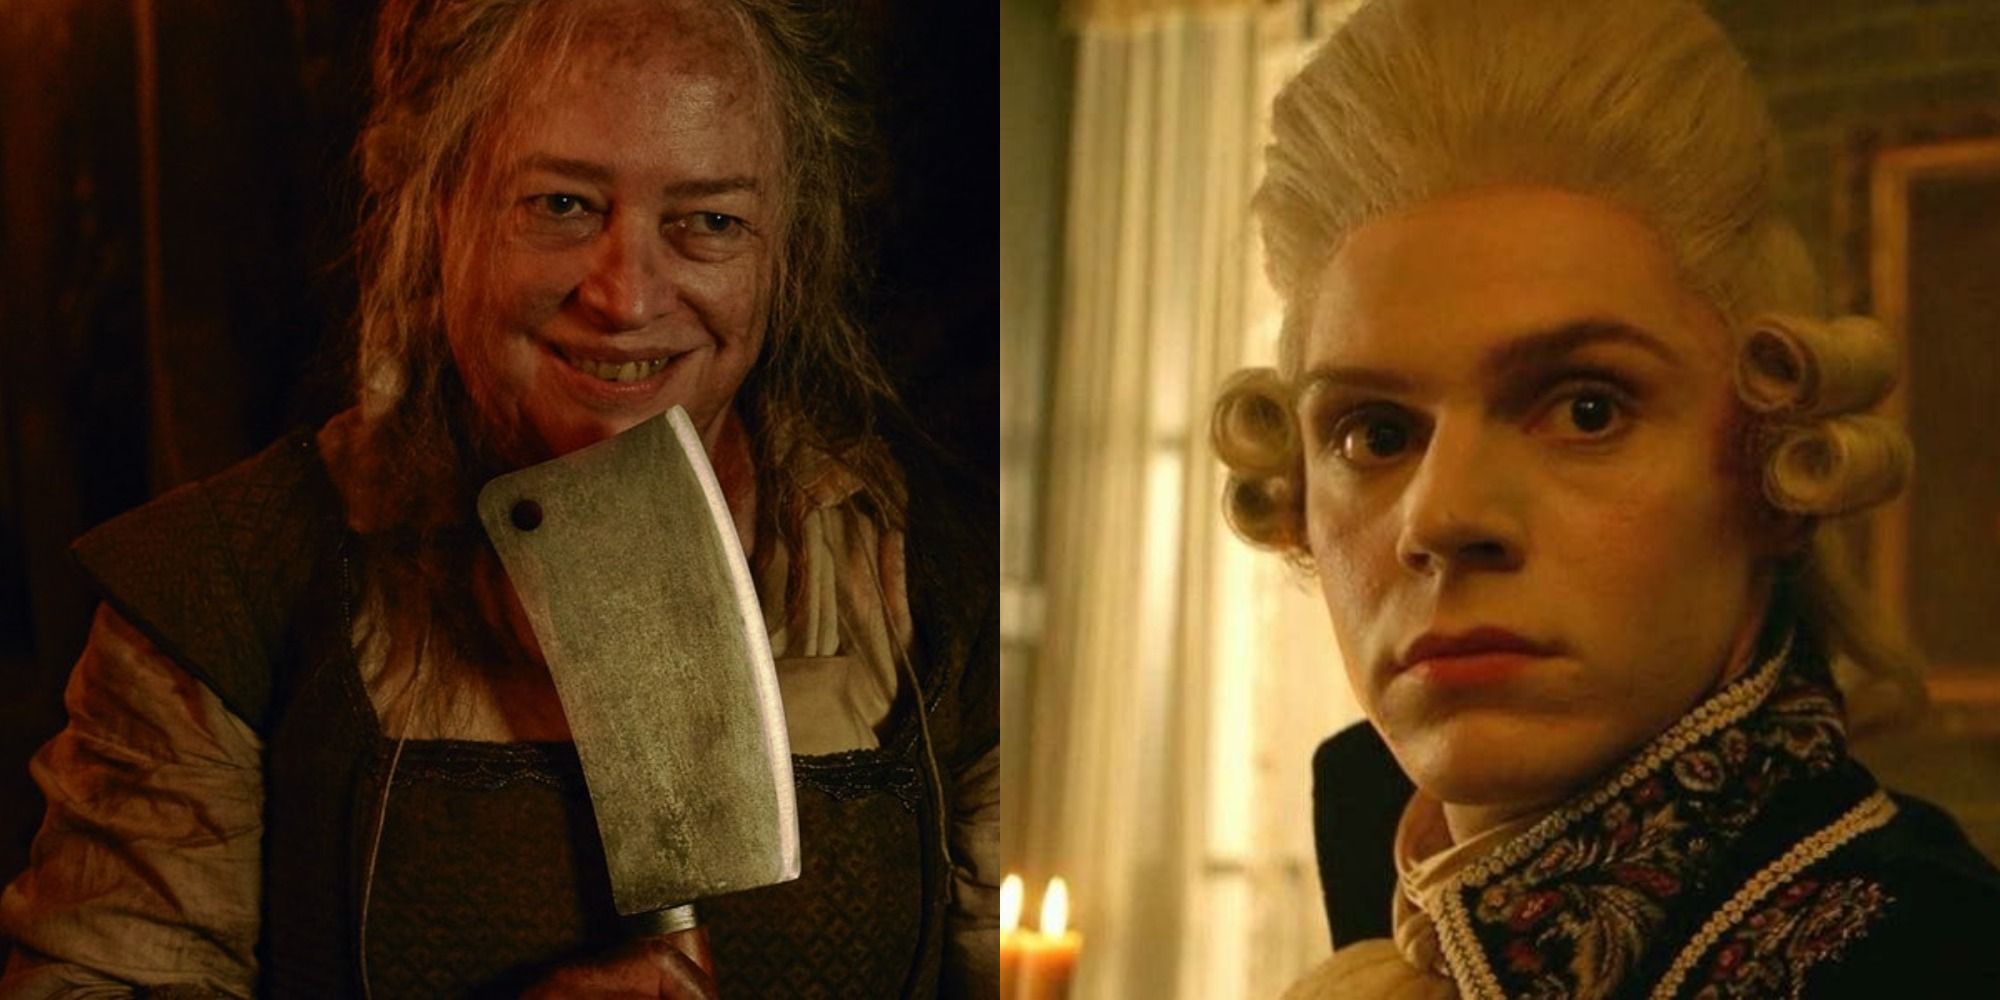 An image of Kathy Bates as The Butcher and Evan Peters as Edward Mott in AHS: Roanoke